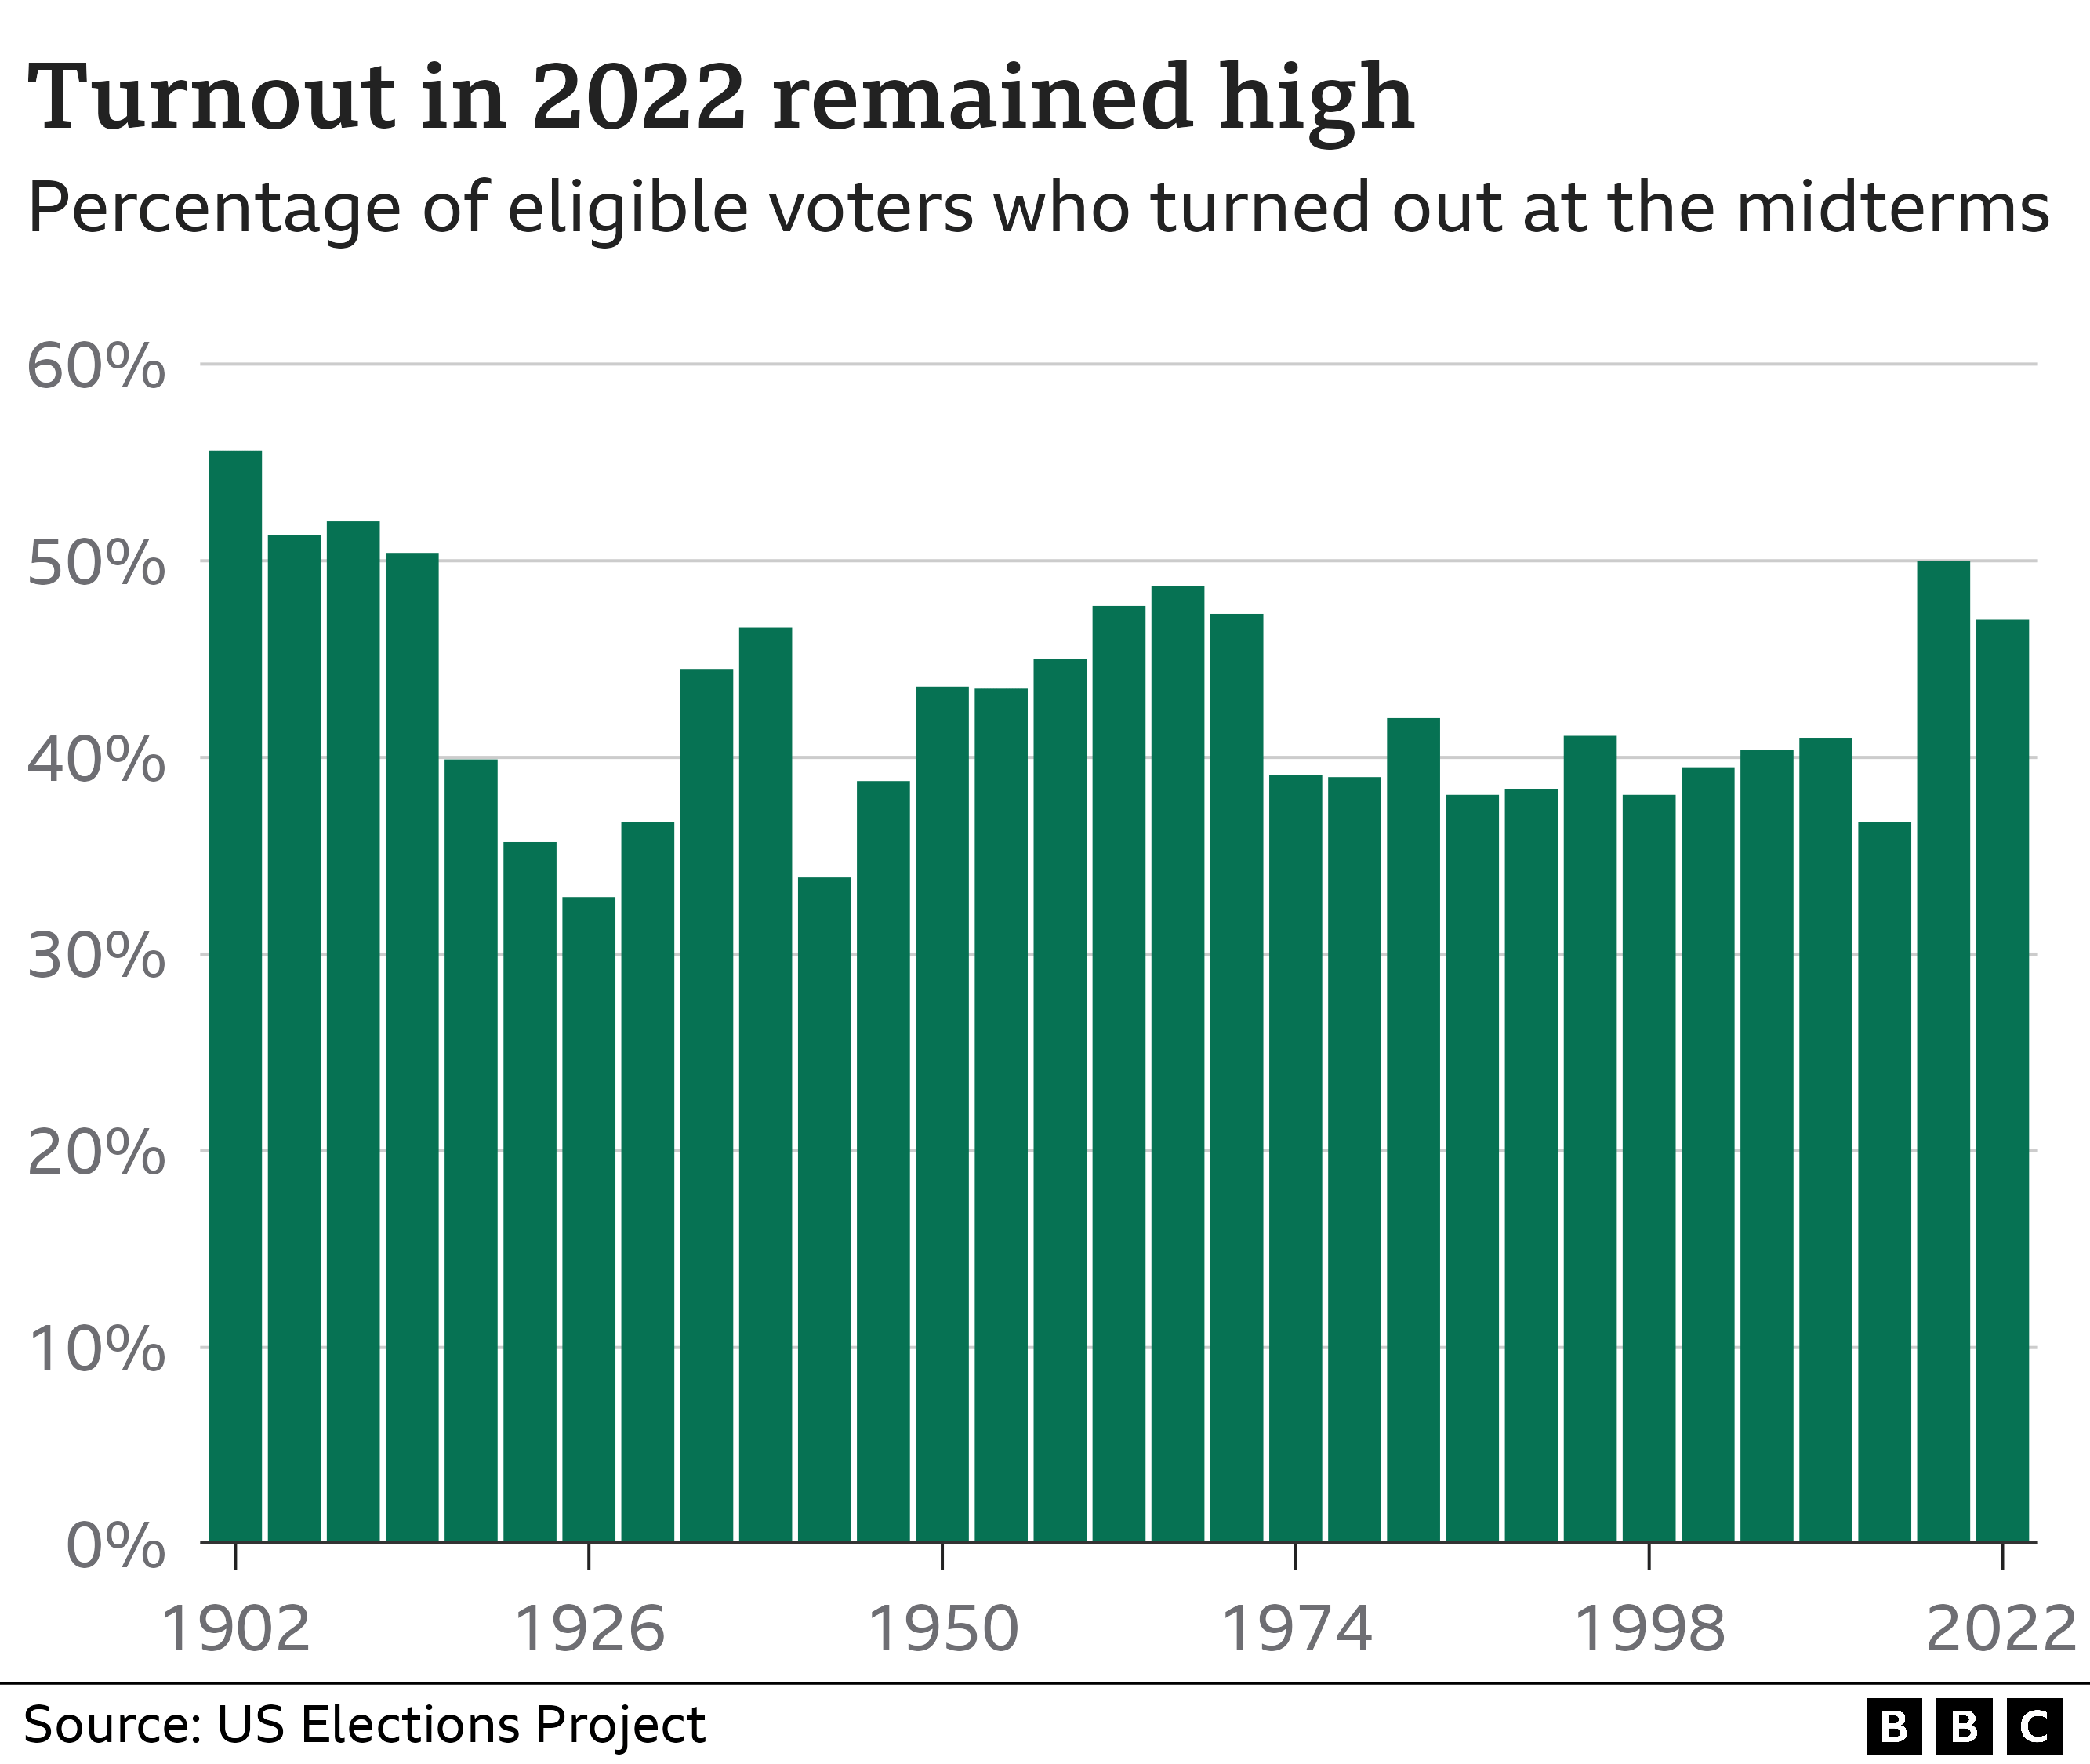 Chart showing turnout over time. 2022 is 47%